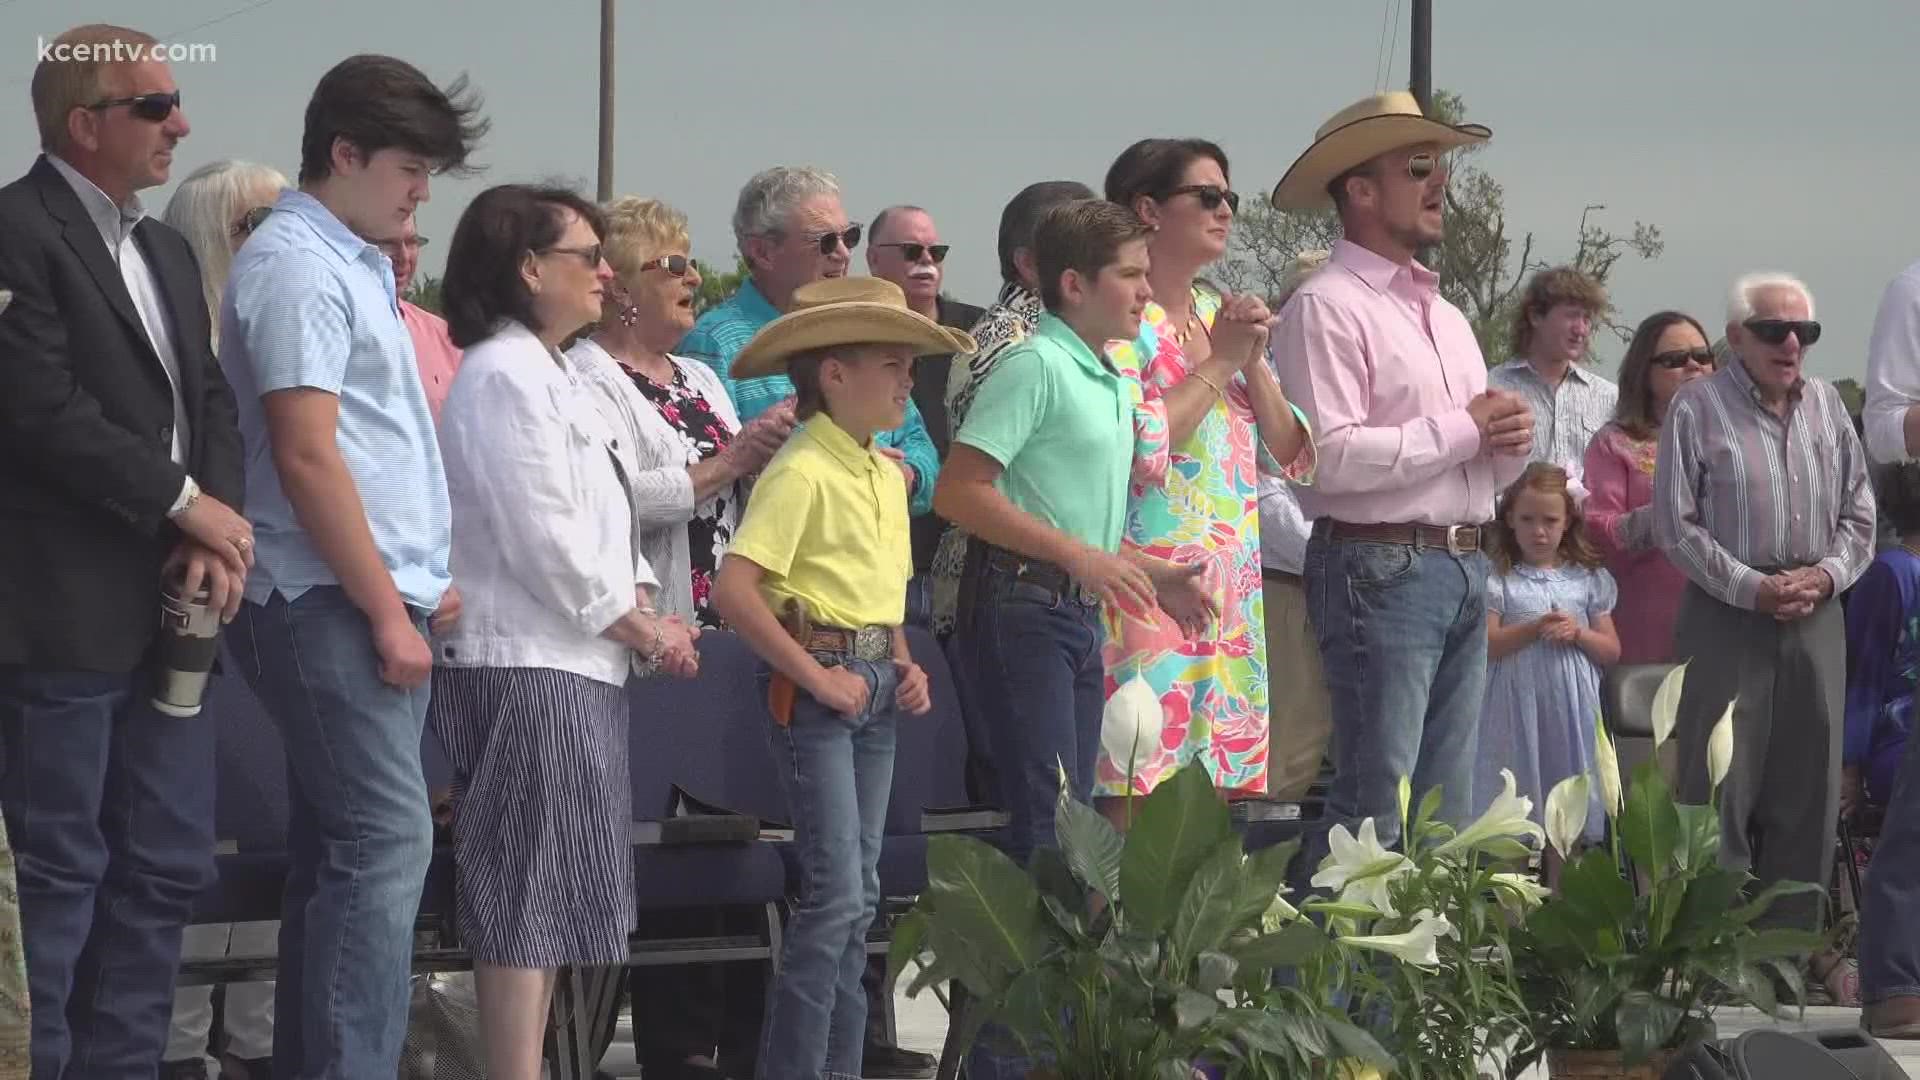 Local church holds services for the first time after tornado destroys building.